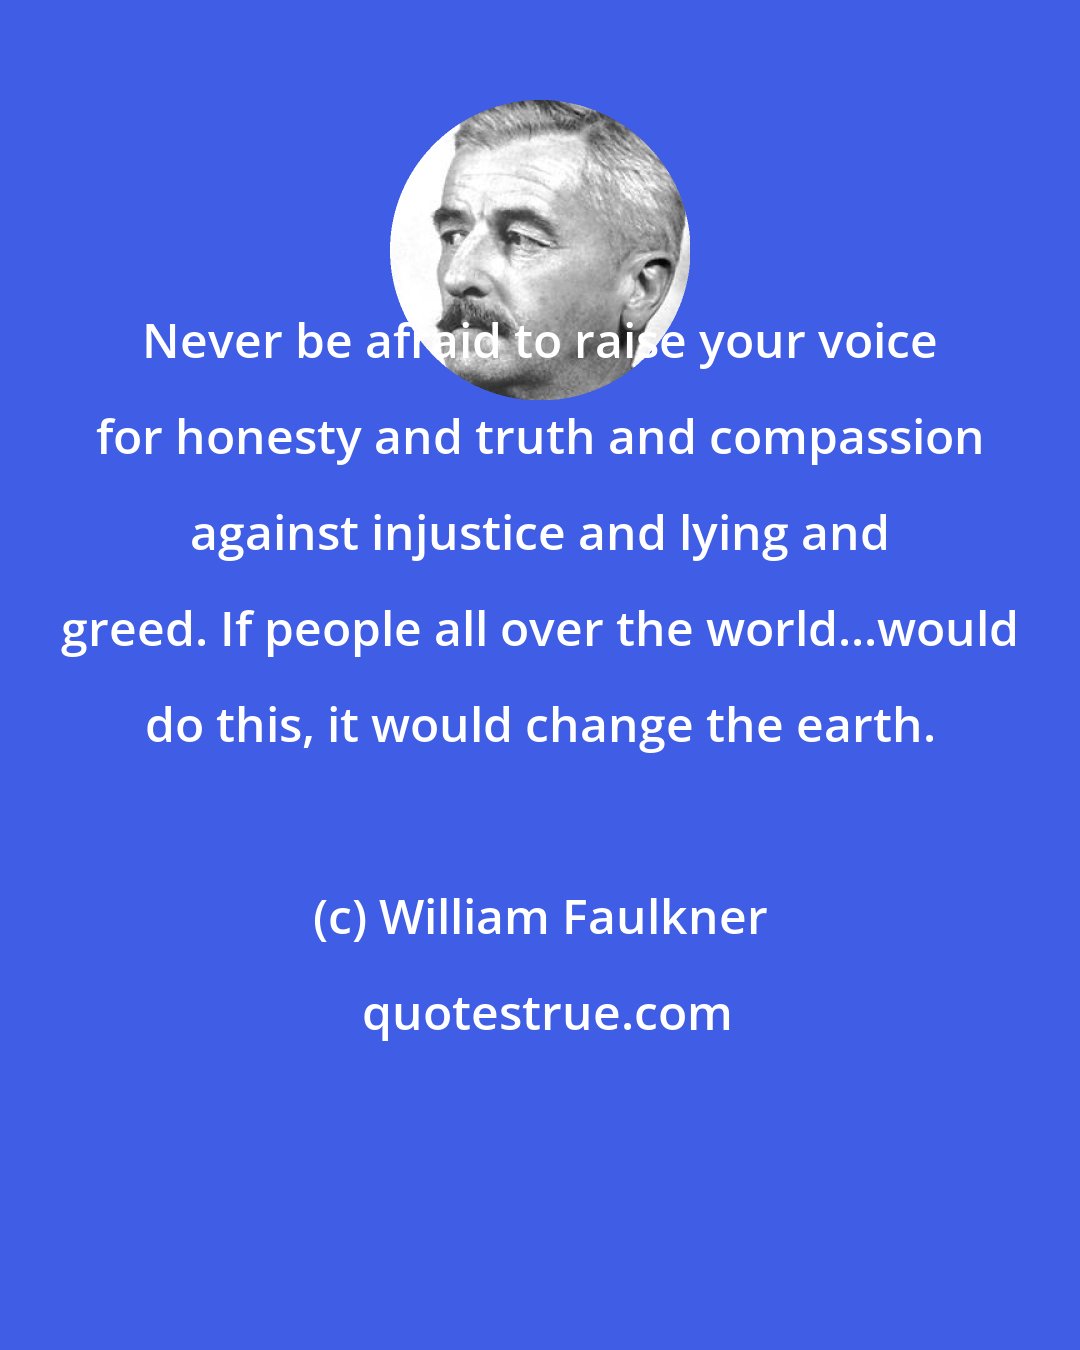 William Faulkner: Never be afraid to raise your voice for honesty and truth and compassion against injustice and lying and greed. If people all over the world...would do this, it would change the earth.